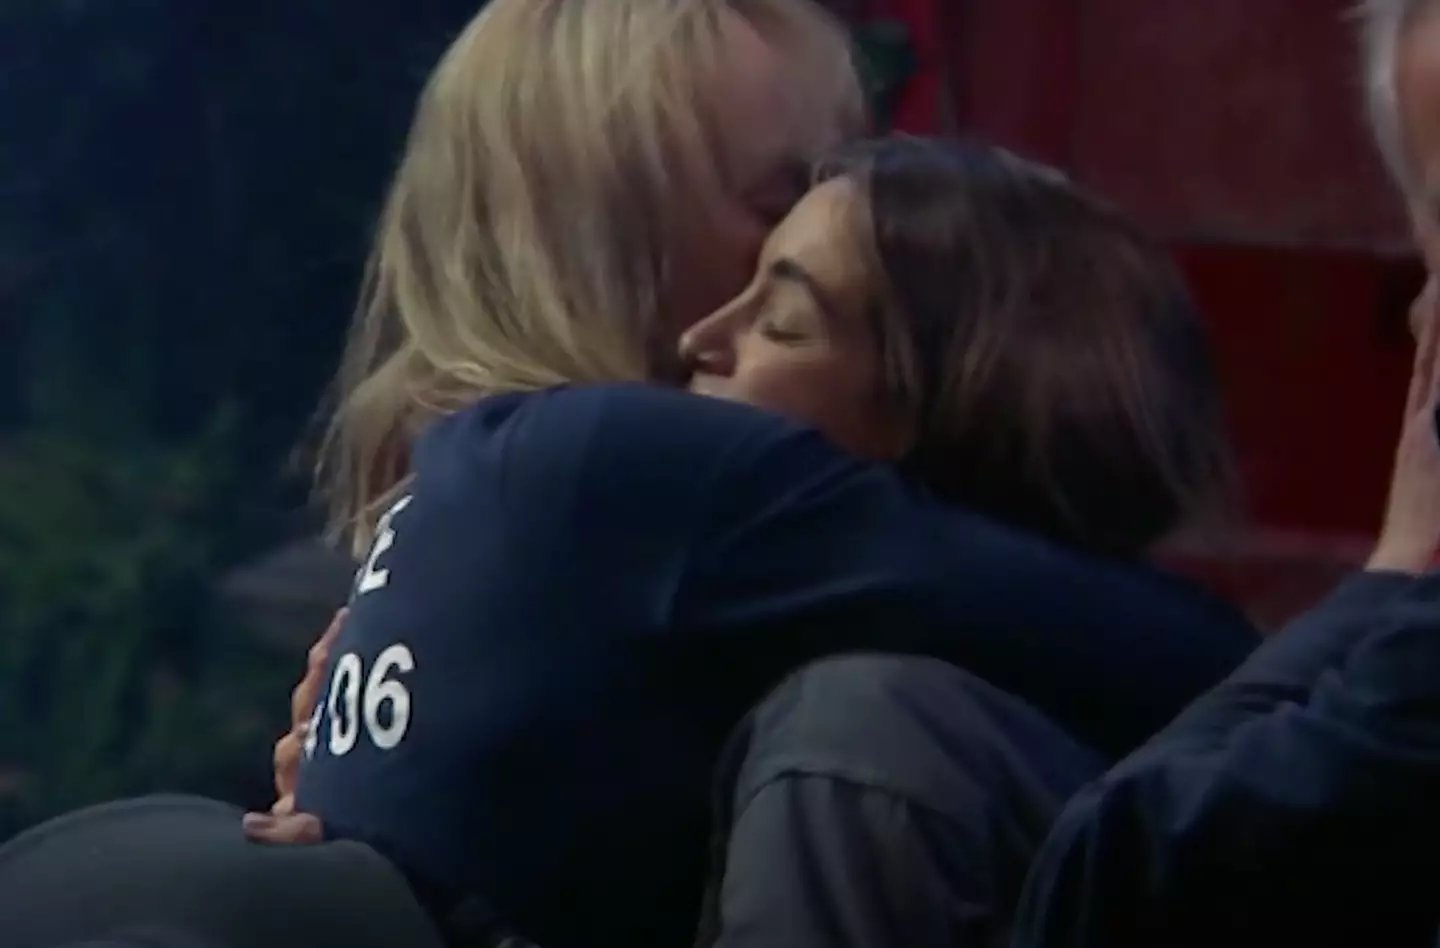 Louise and Frankie embraced (